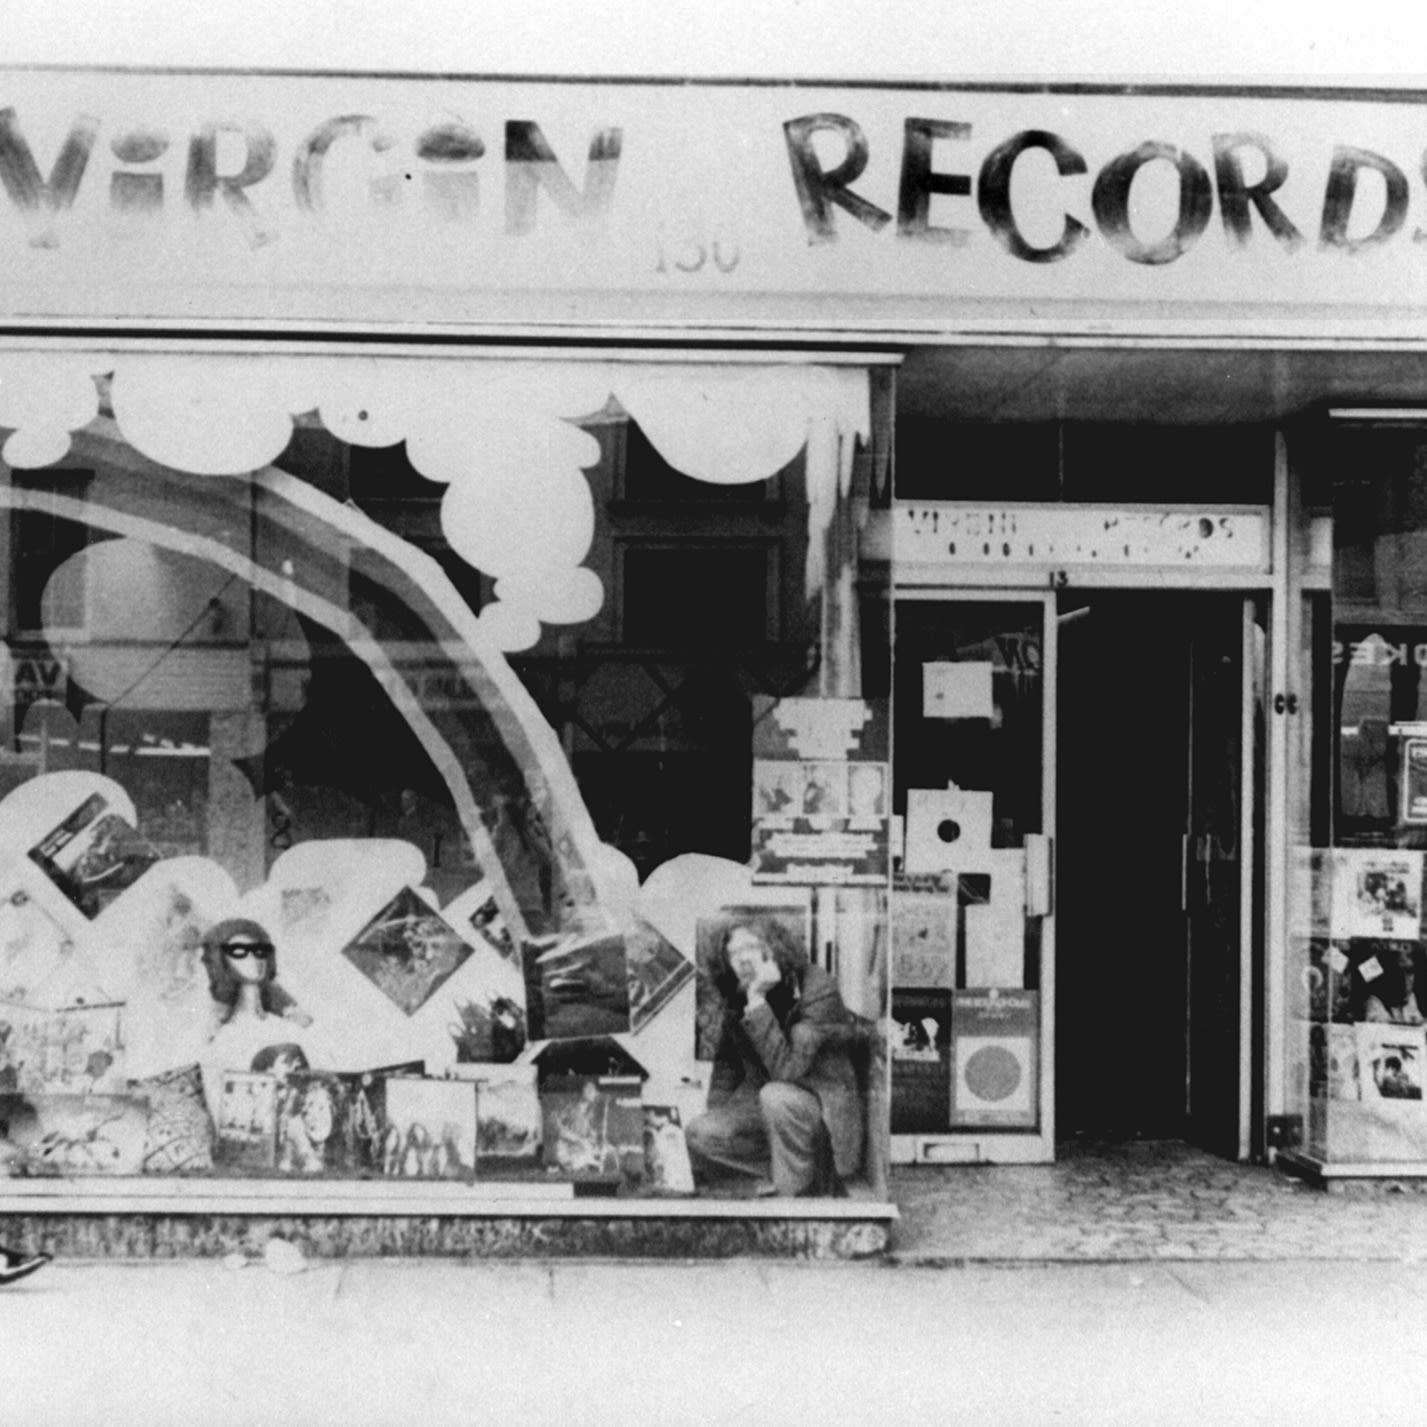 Shop front of Virgin Records years ago in black and white 